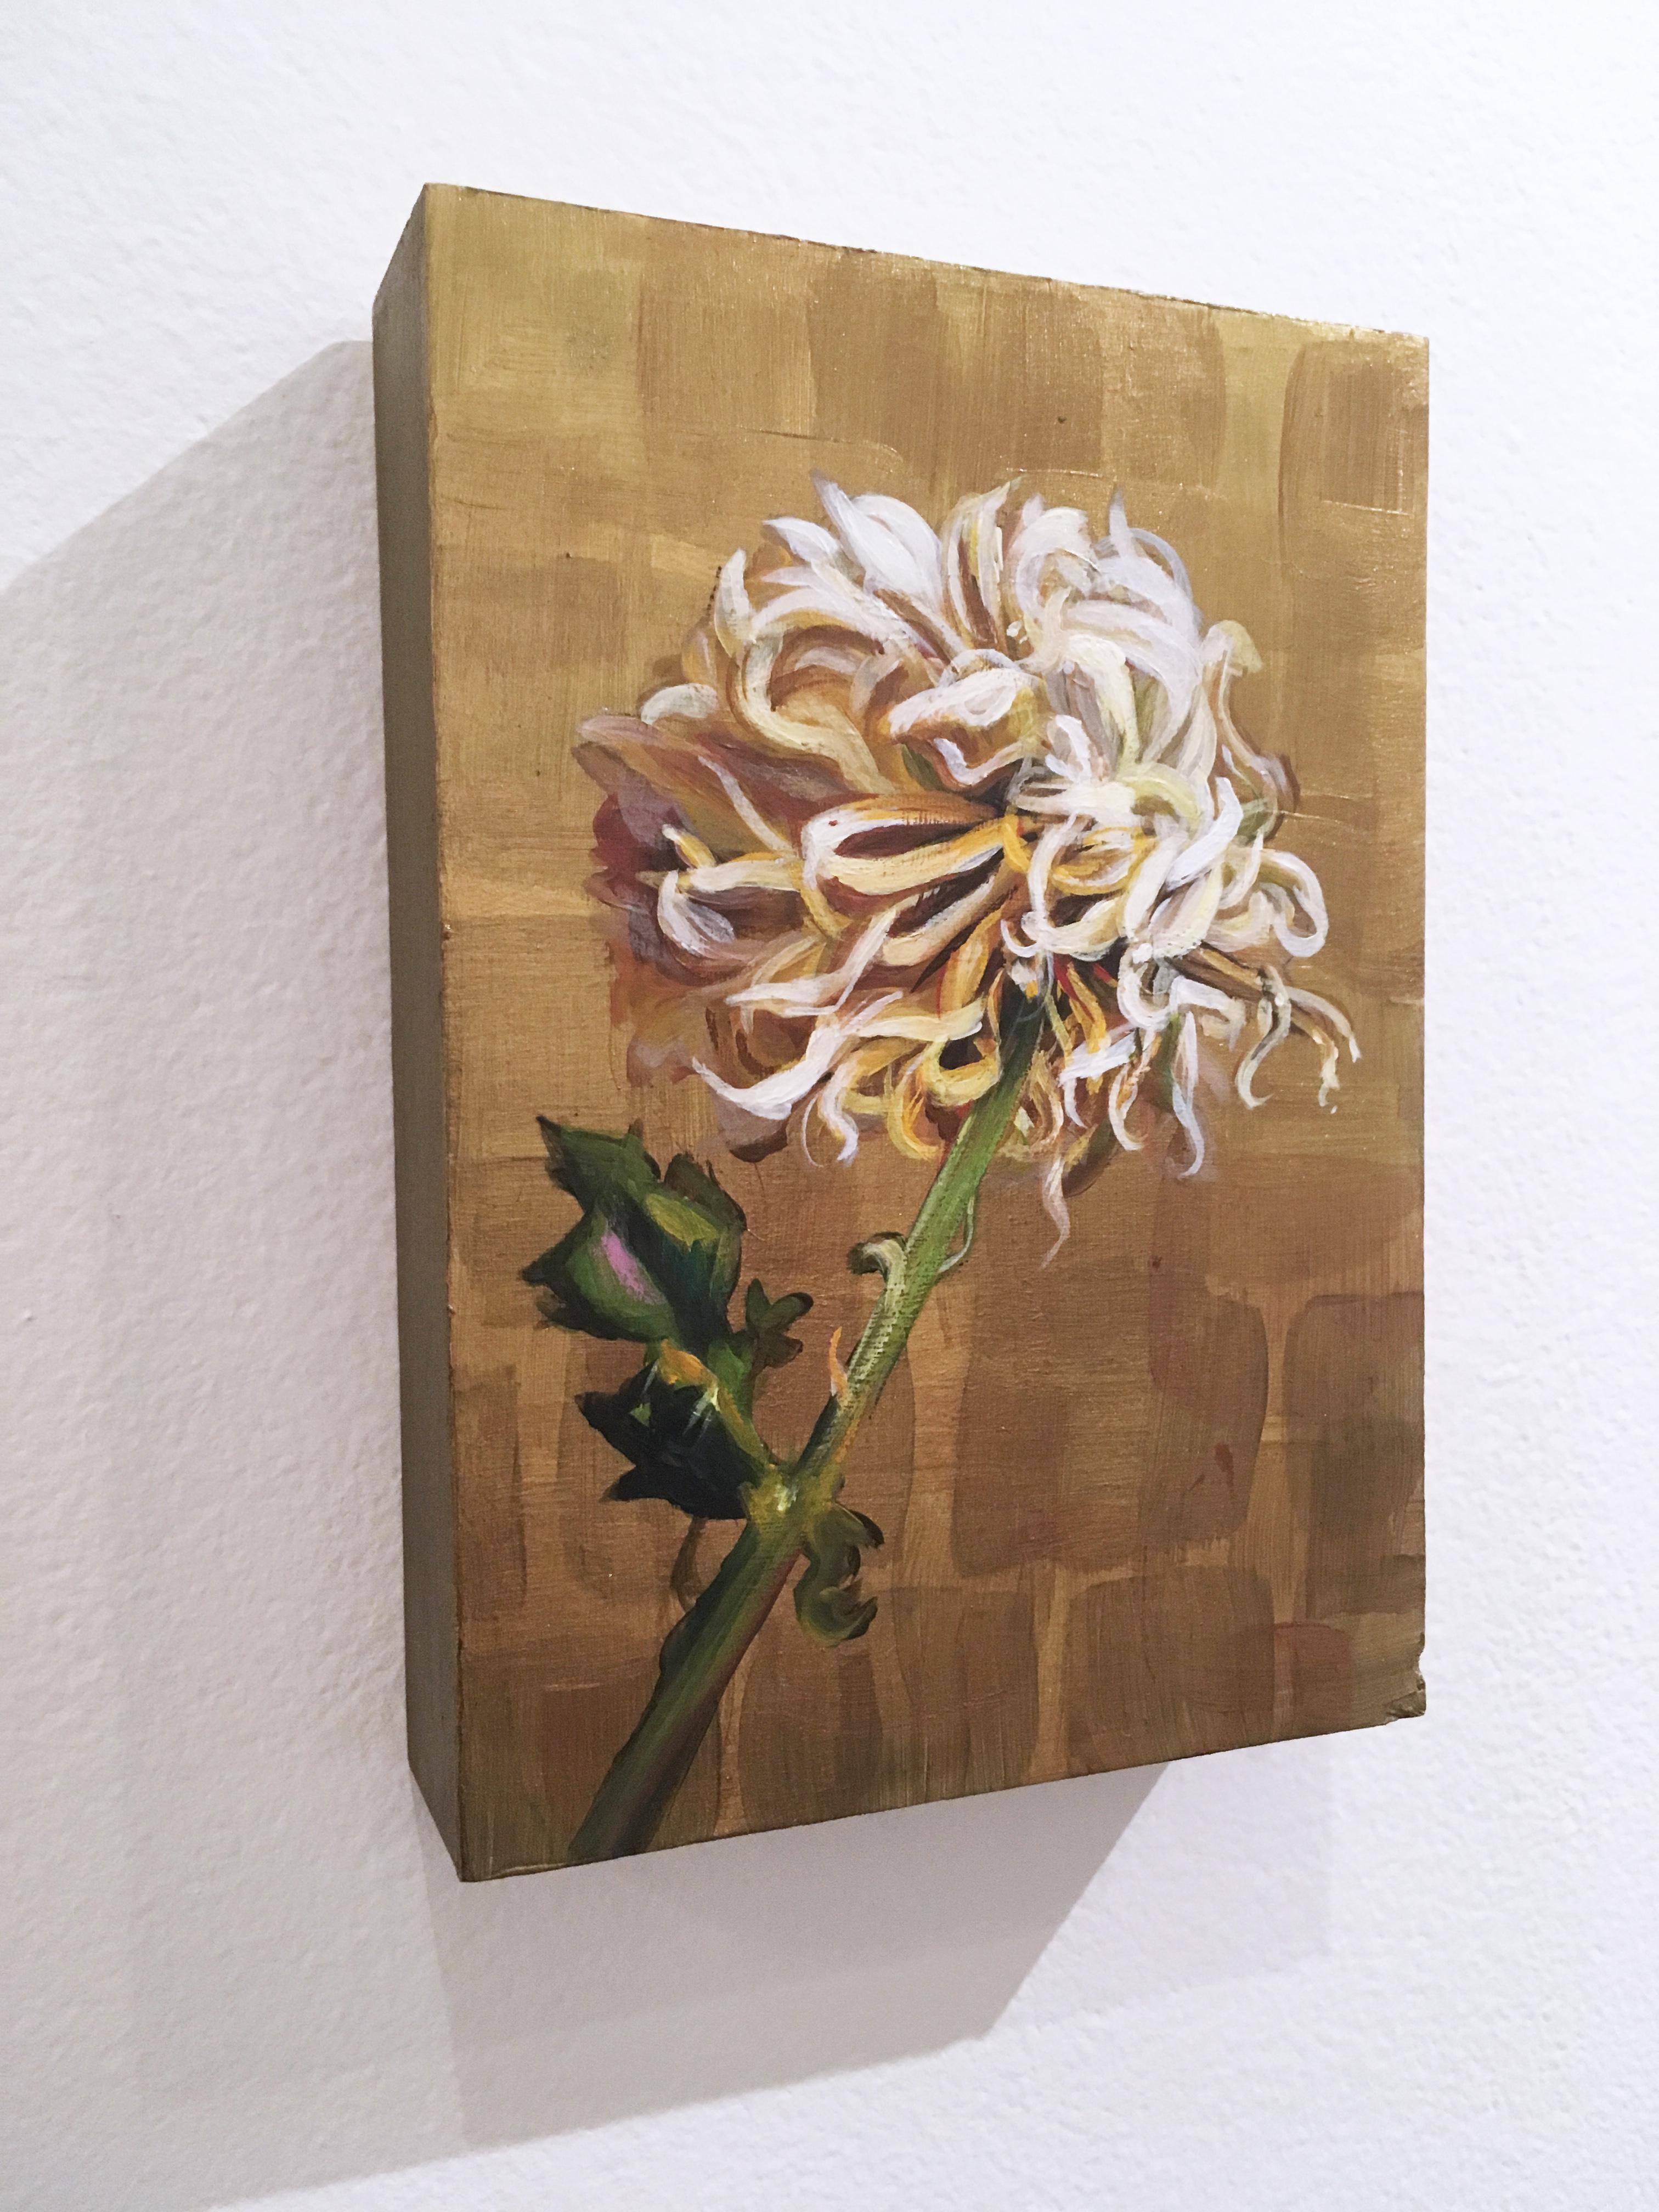 Gold and Bloom, 2019, acrylic, wood panel, floral, chrysanthemum, flower - Contemporary Painting by Gigi Chen